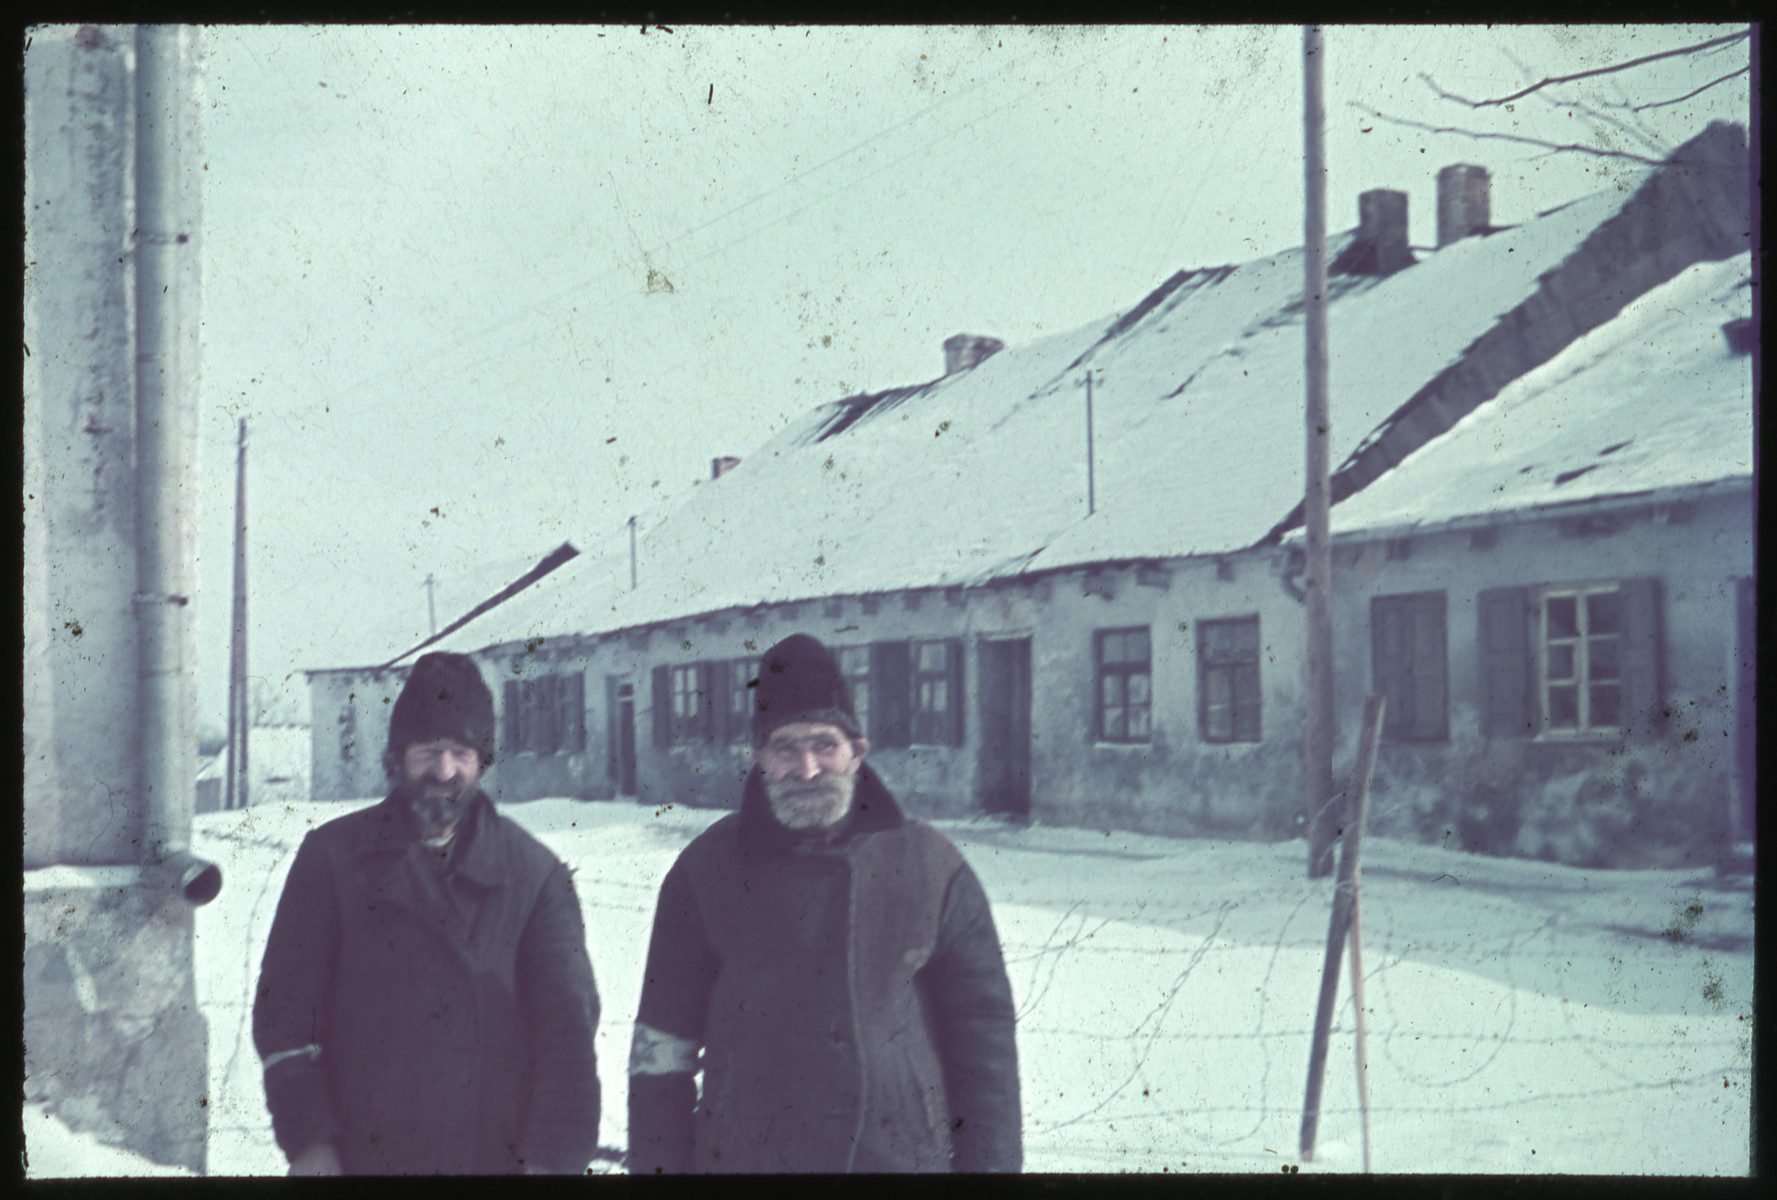 Close-up portrait of two Jewish men wearing beards and armbands on a snow-covered road.